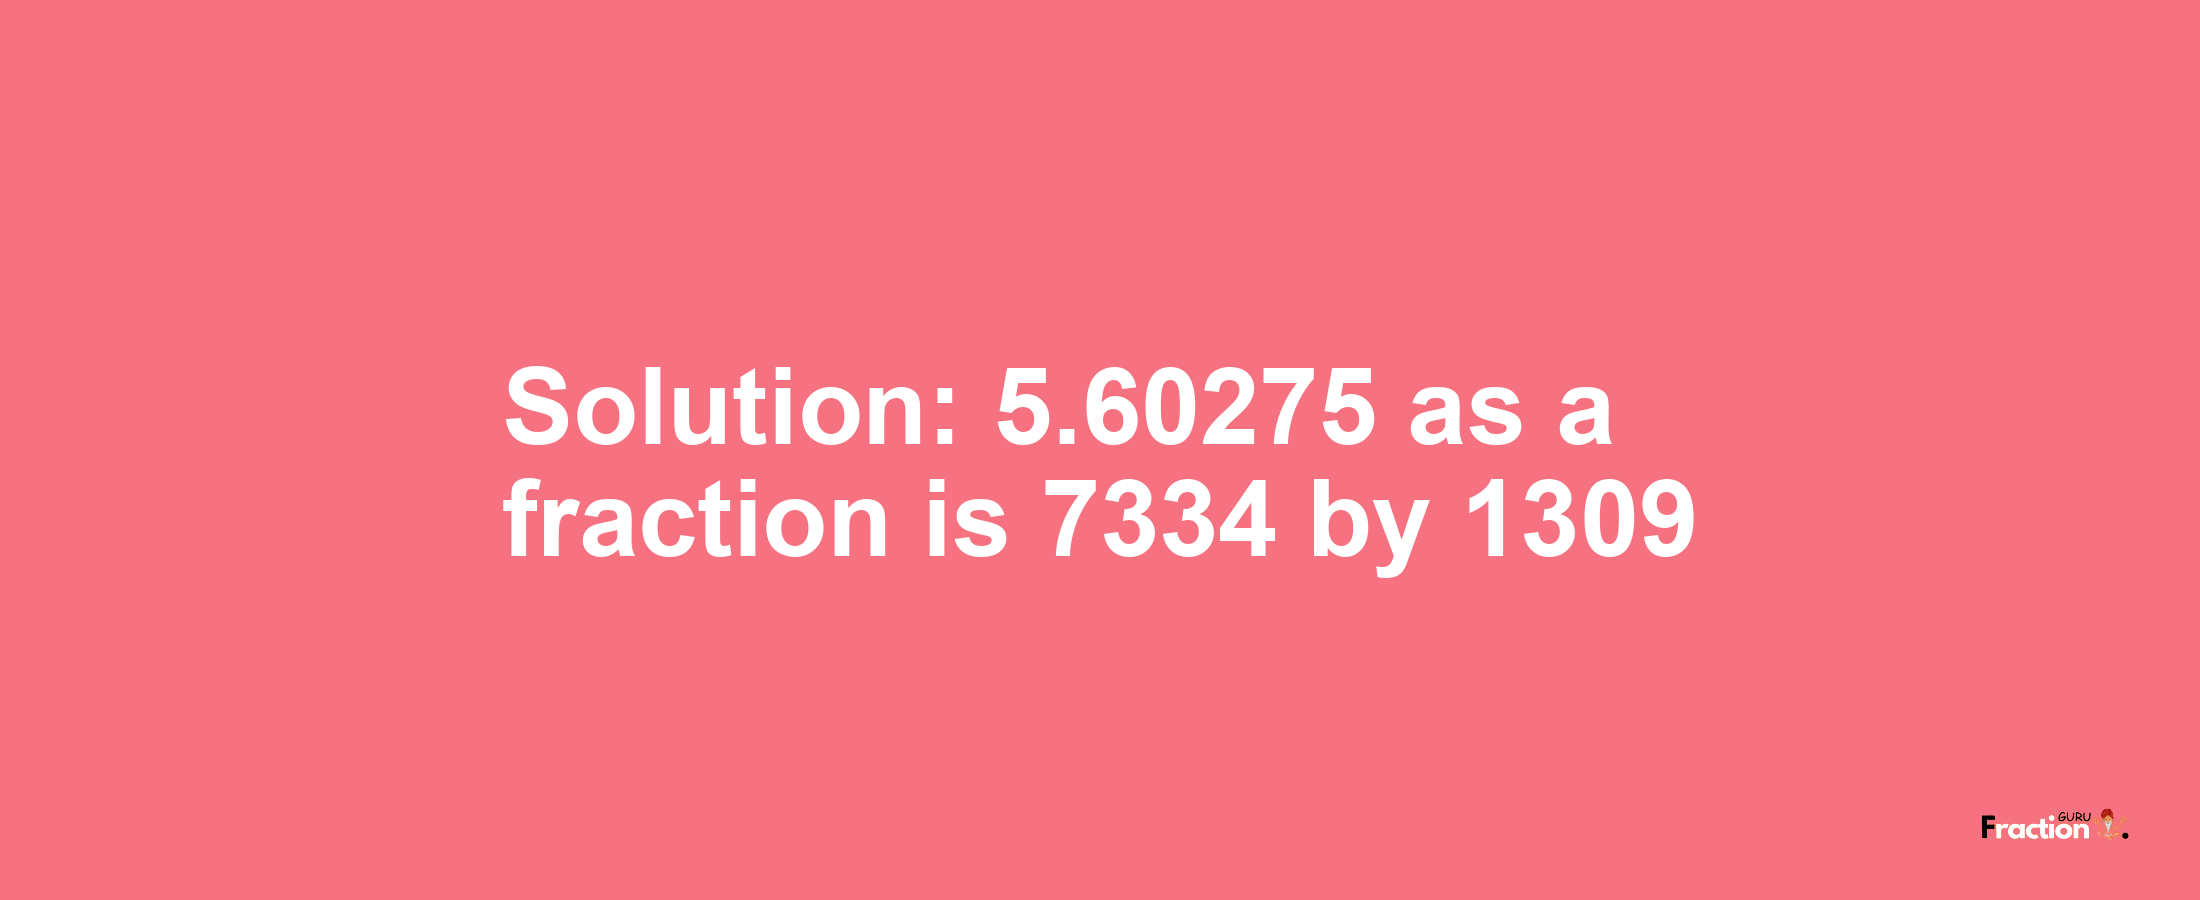 Solution:5.60275 as a fraction is 7334/1309